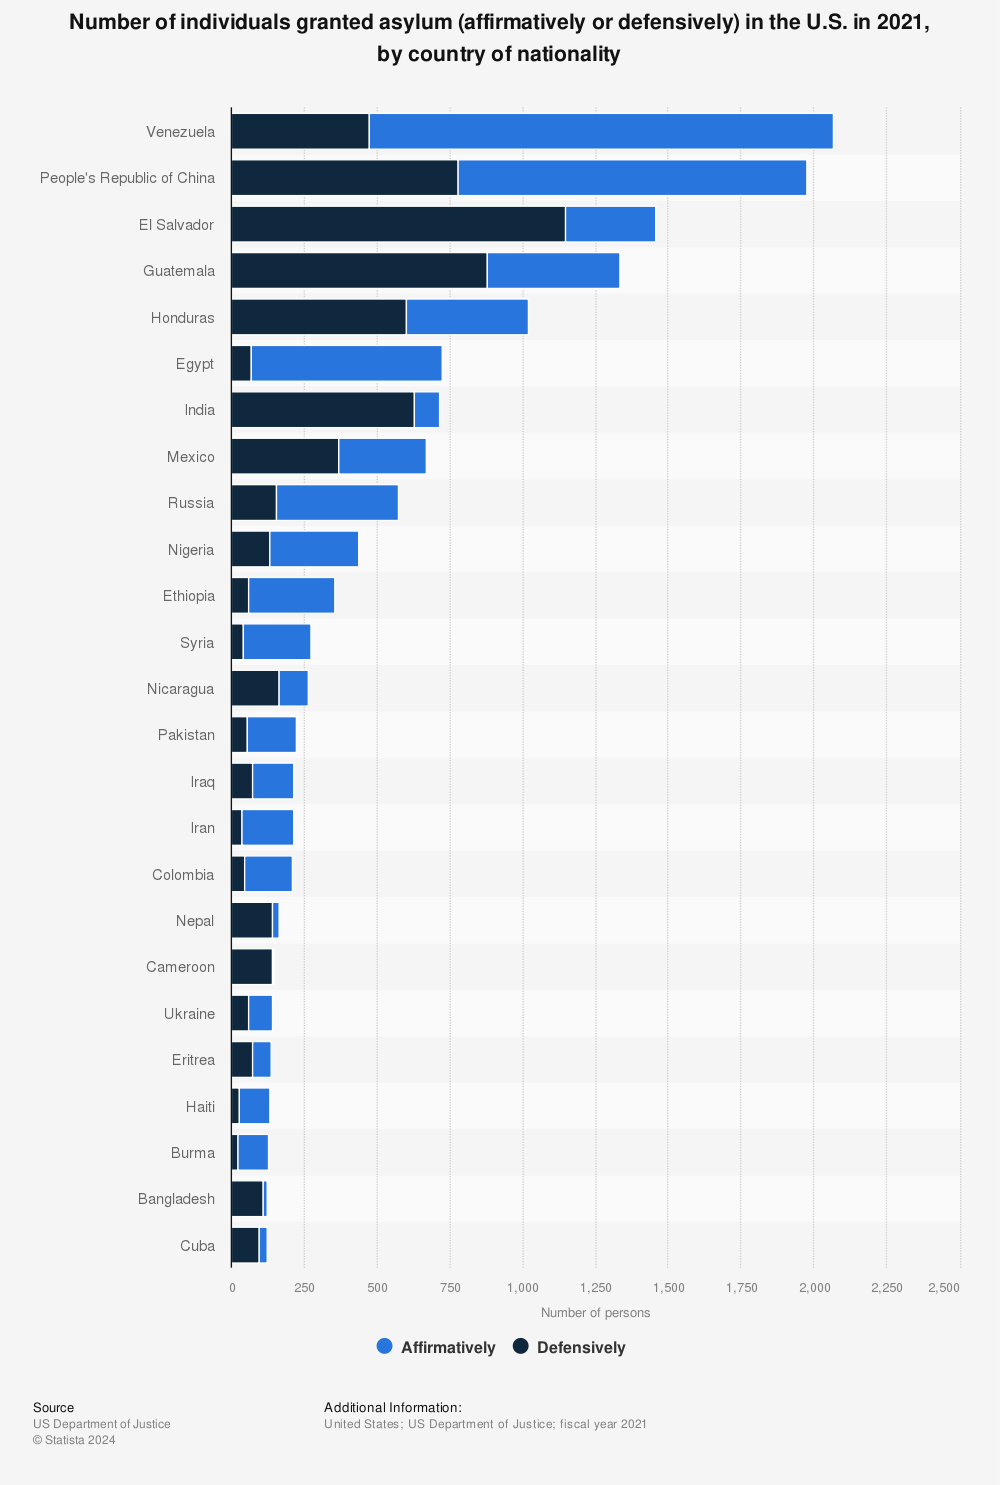 Statistic: Number of individuals granted asylum (affirmatively or defensively) in the U.S. in 2021, by country of nationality | Statista